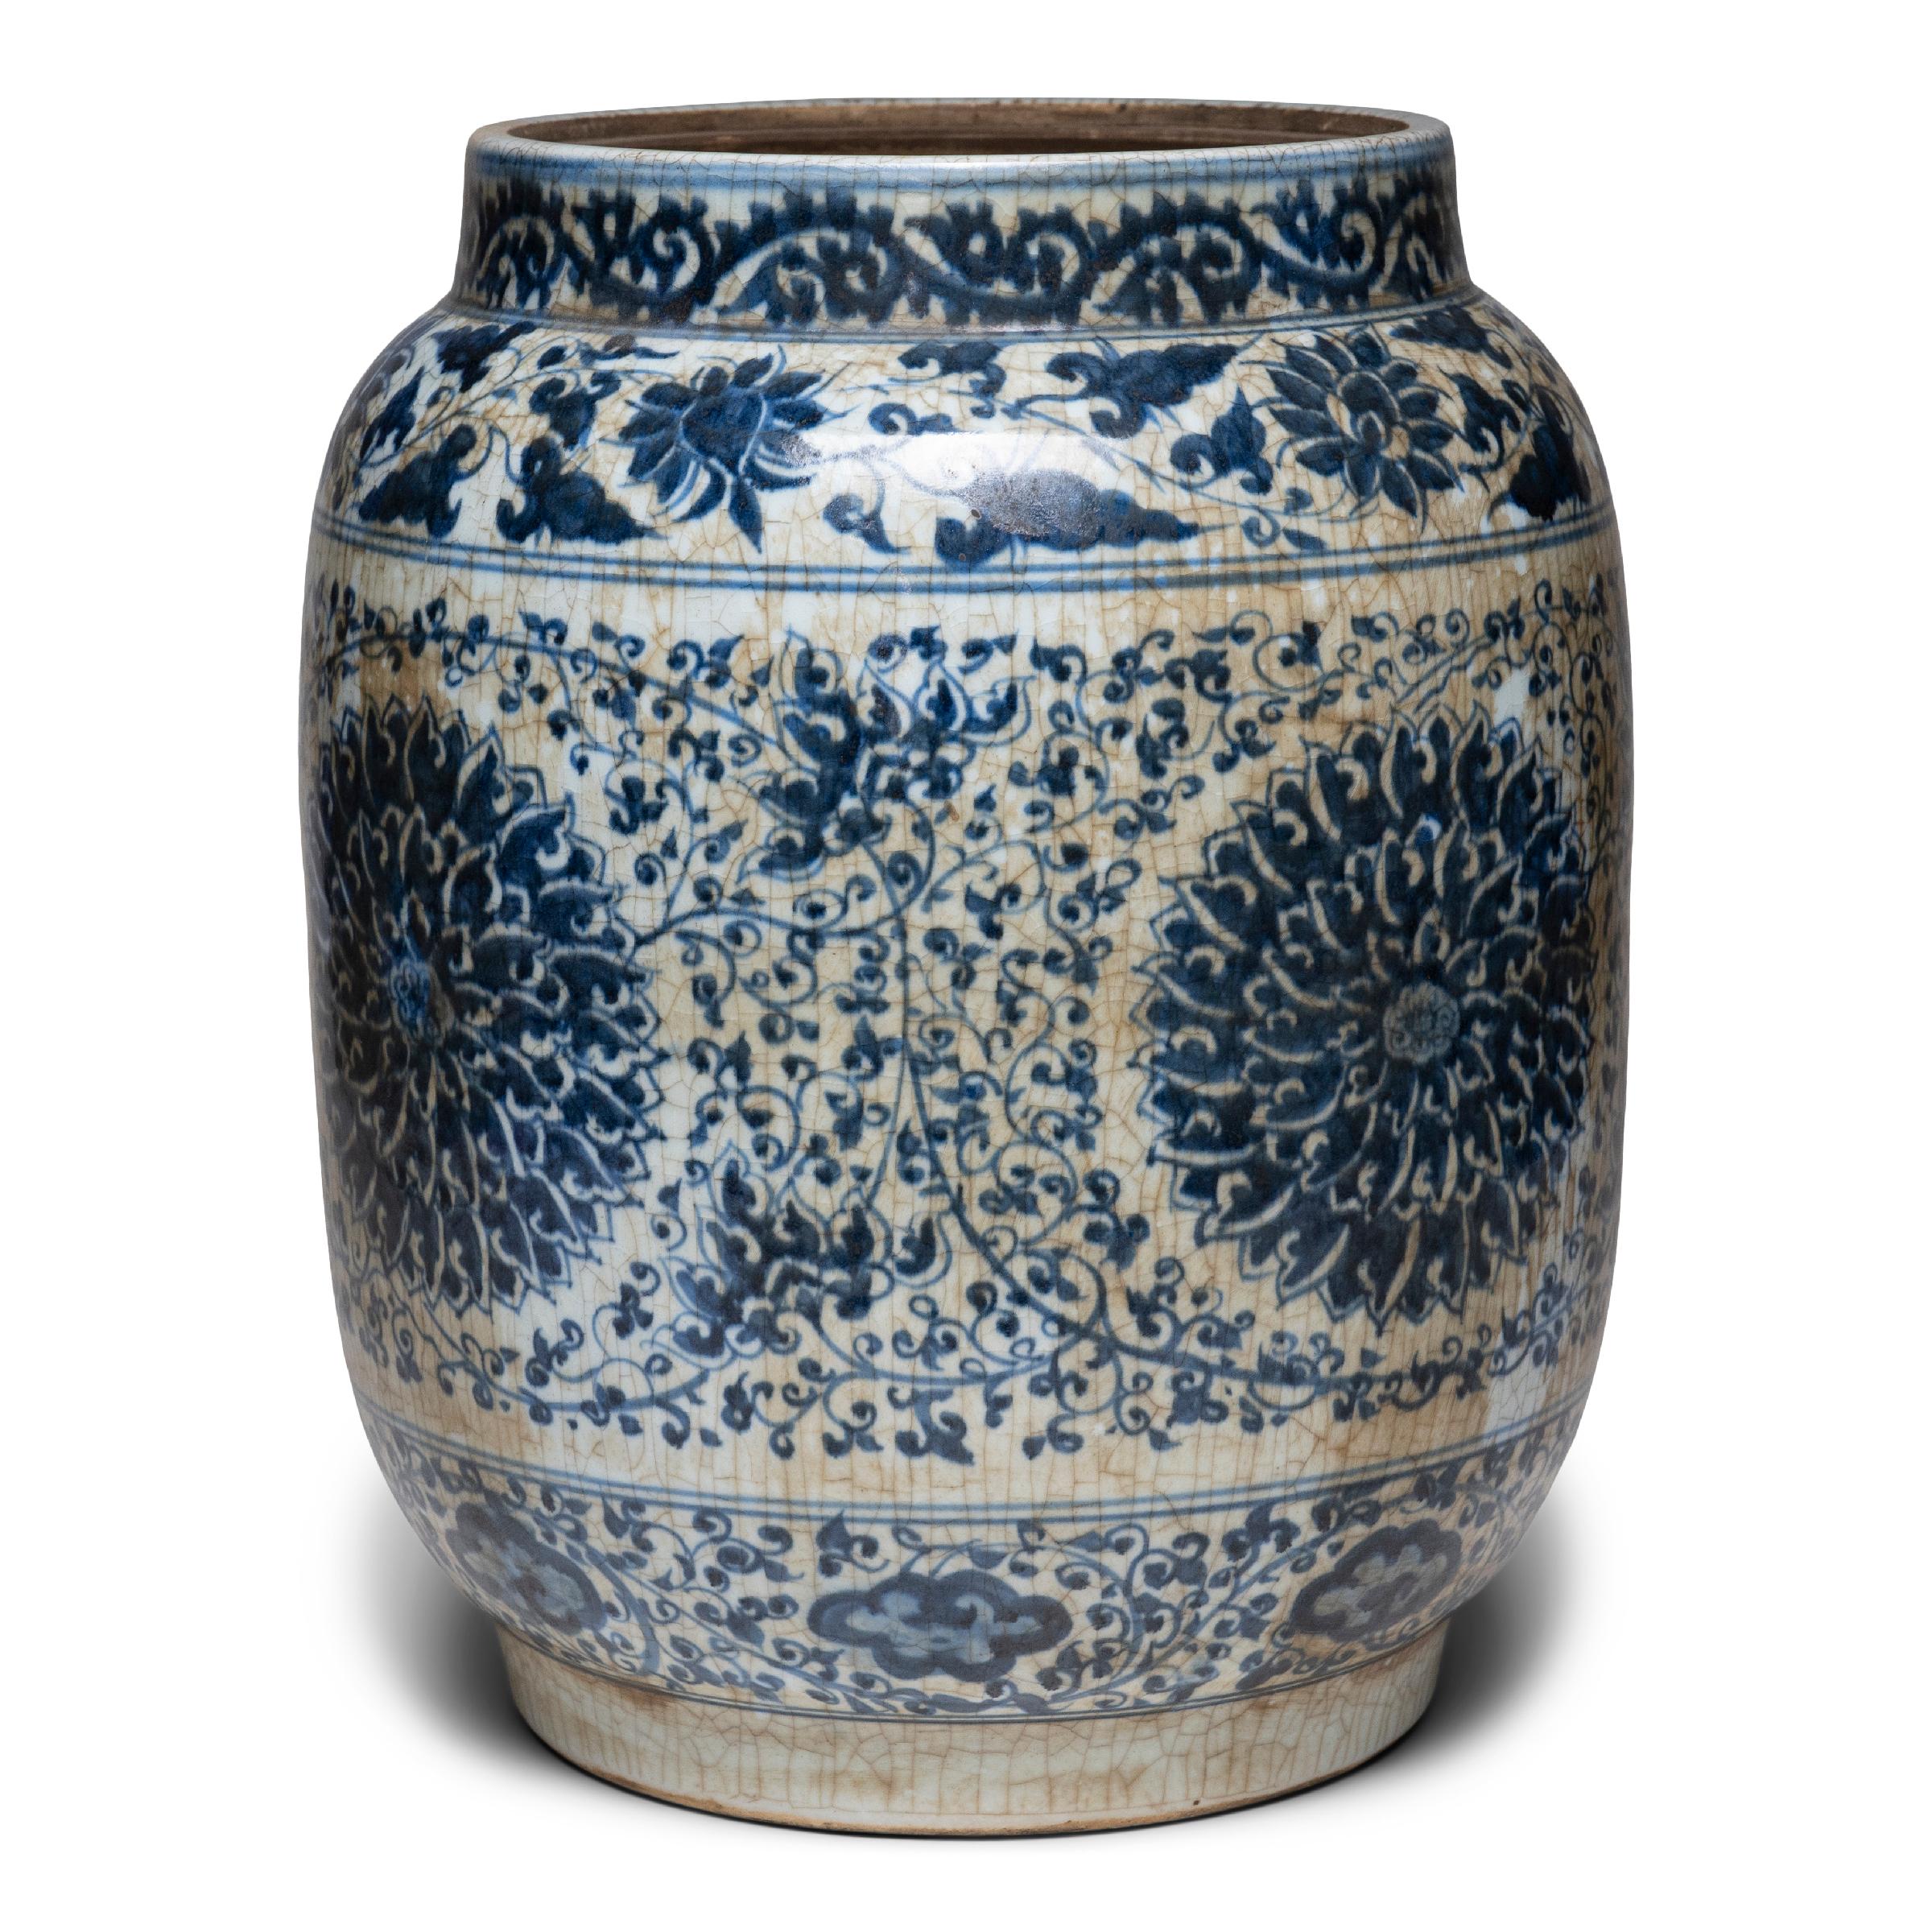 This large drum-form jar continues a centuries-old tradition of Chinese blue-and-white porcelain ware. Hand-painted with cobalt-blue glaze, the jar is festooned with trailing vines and flower blossoms, densely patterned around large chrysanthemum